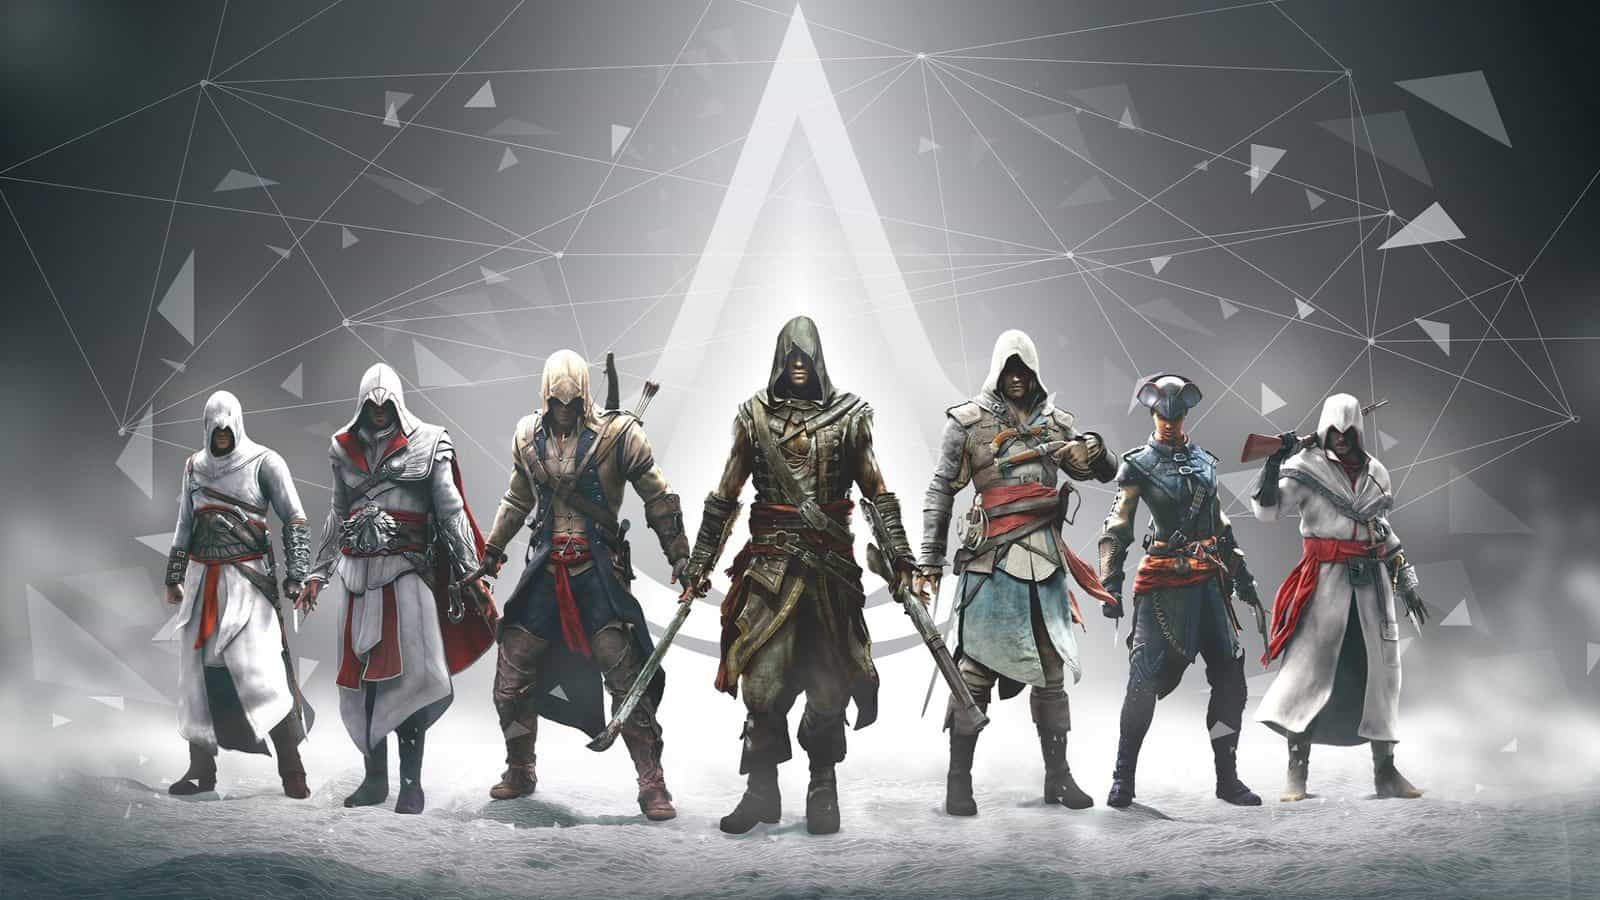 Two Assassins Creed Games Currently In Development